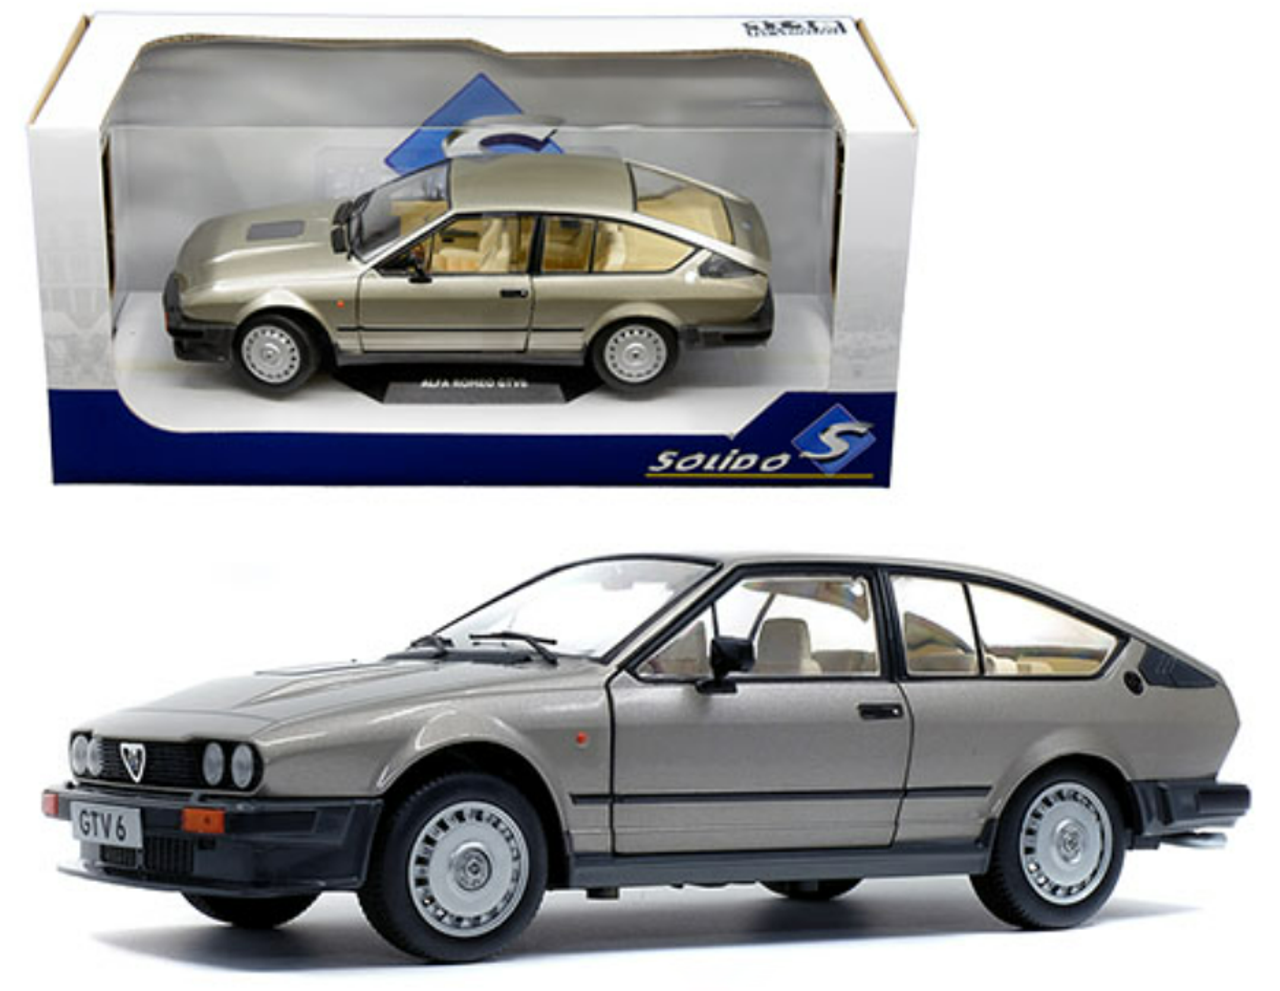 ALFA ROMEO GTV Model Car 1 43 Scale Solido Tin Dealer Special Red 203024 K8 for sale online 